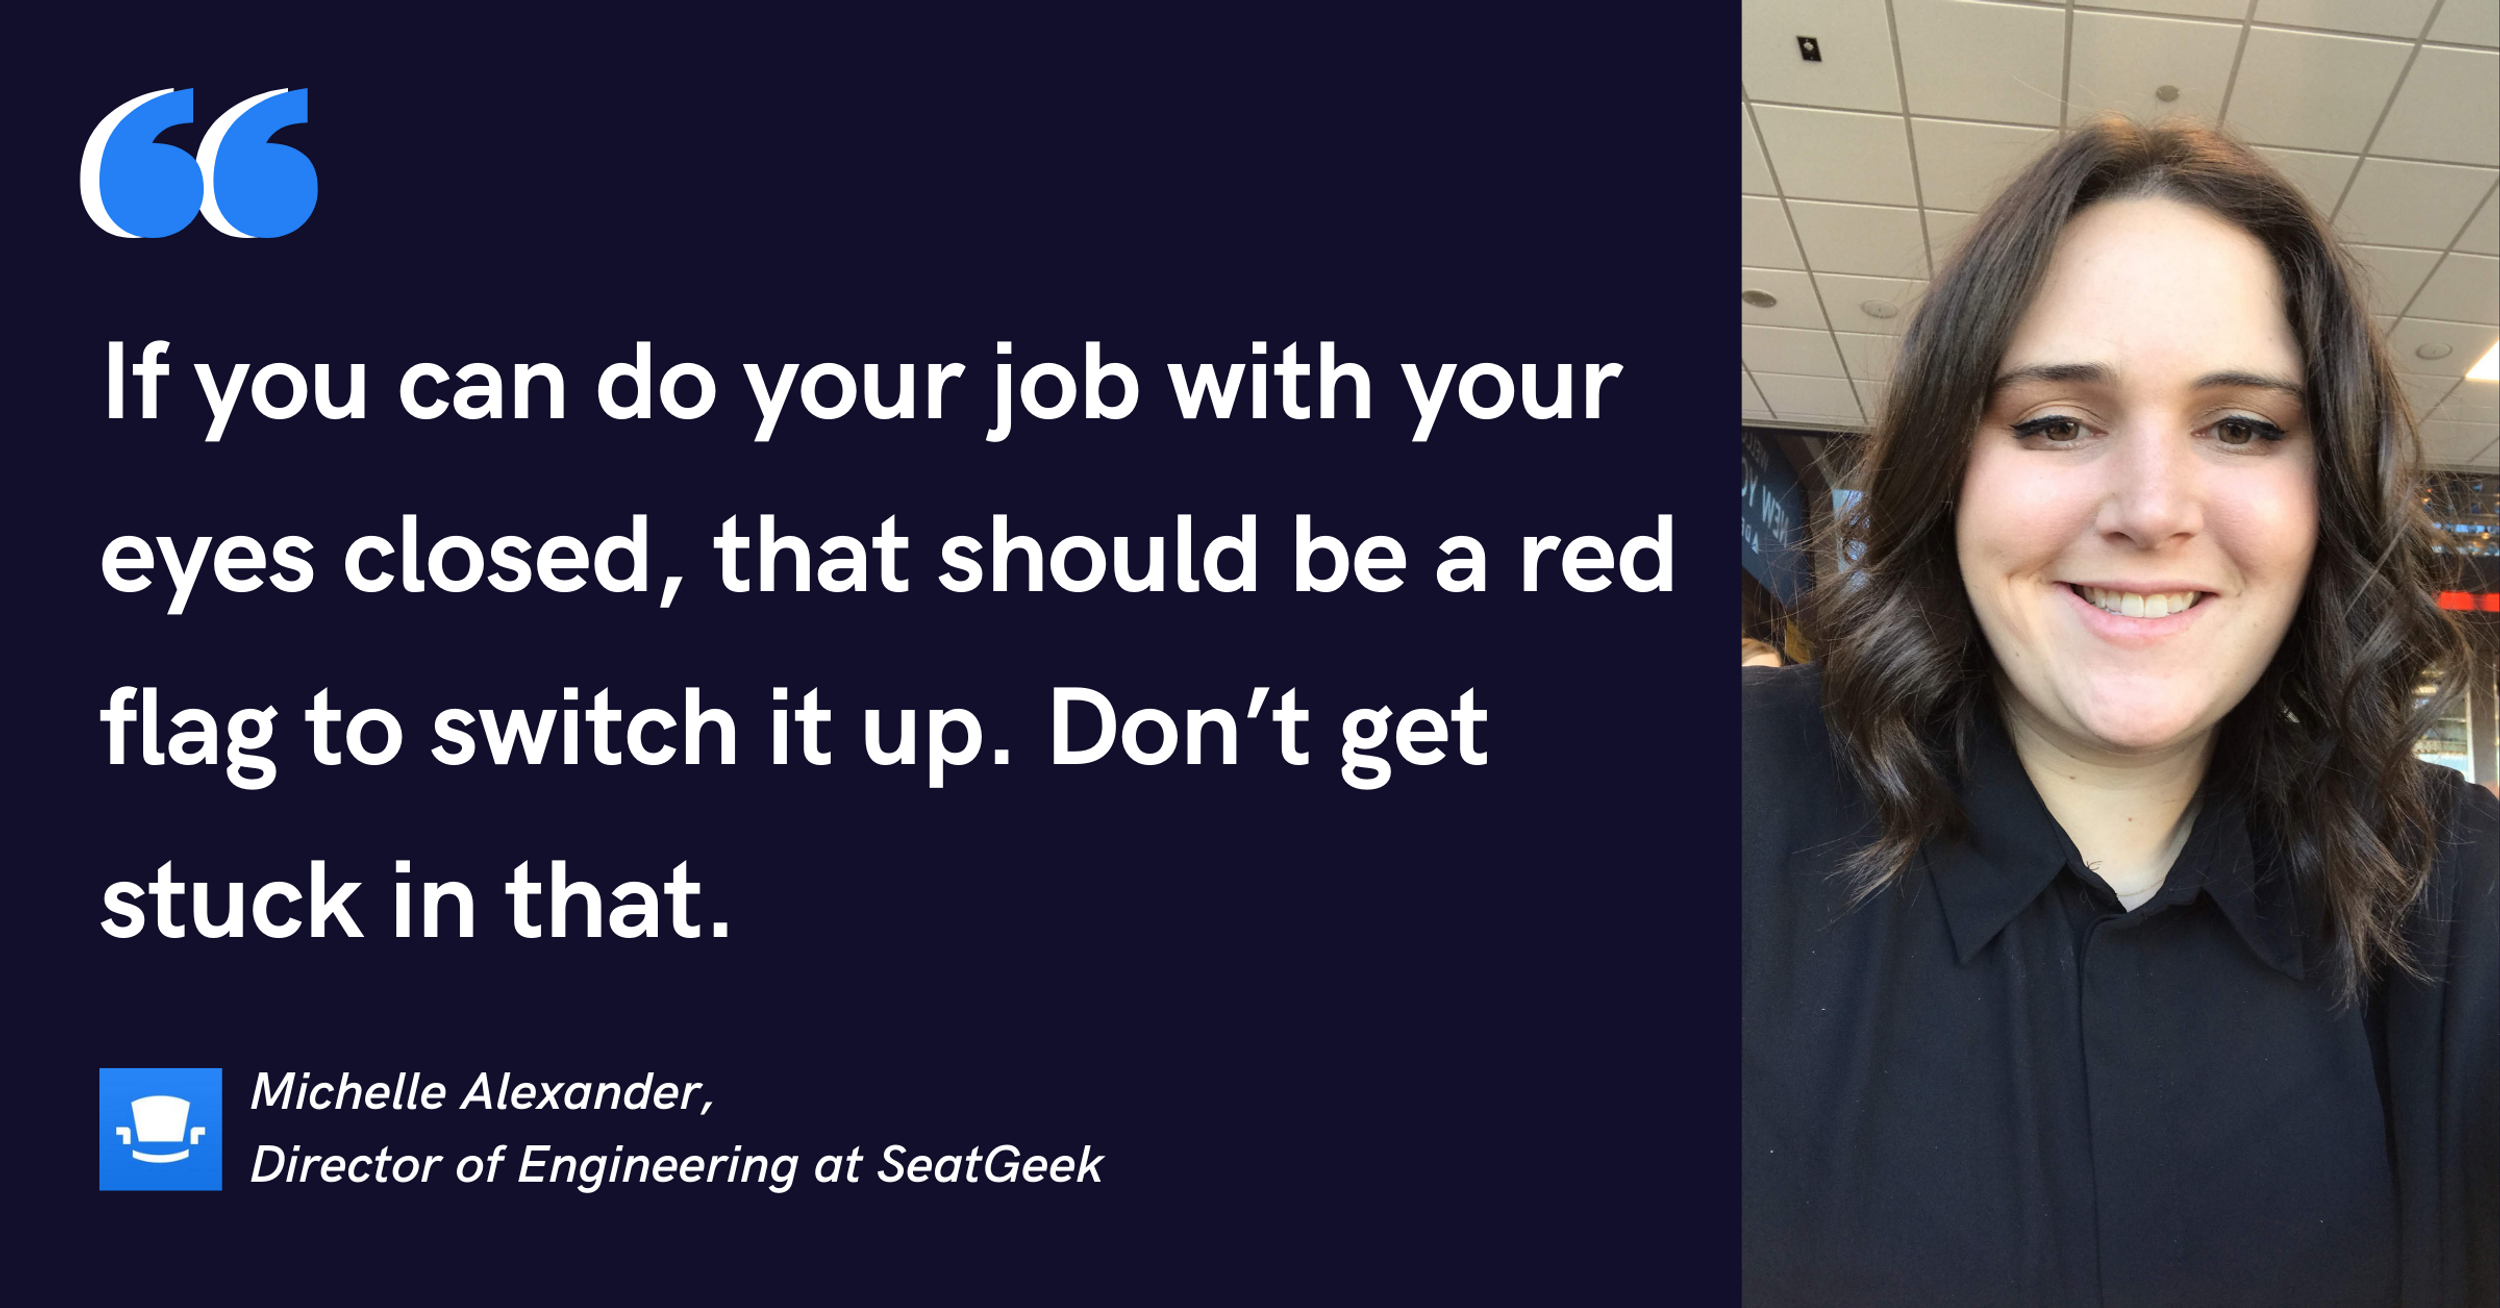 Blog post header with quote from Michelle Alexander, Director of Engineering at SeatGeek